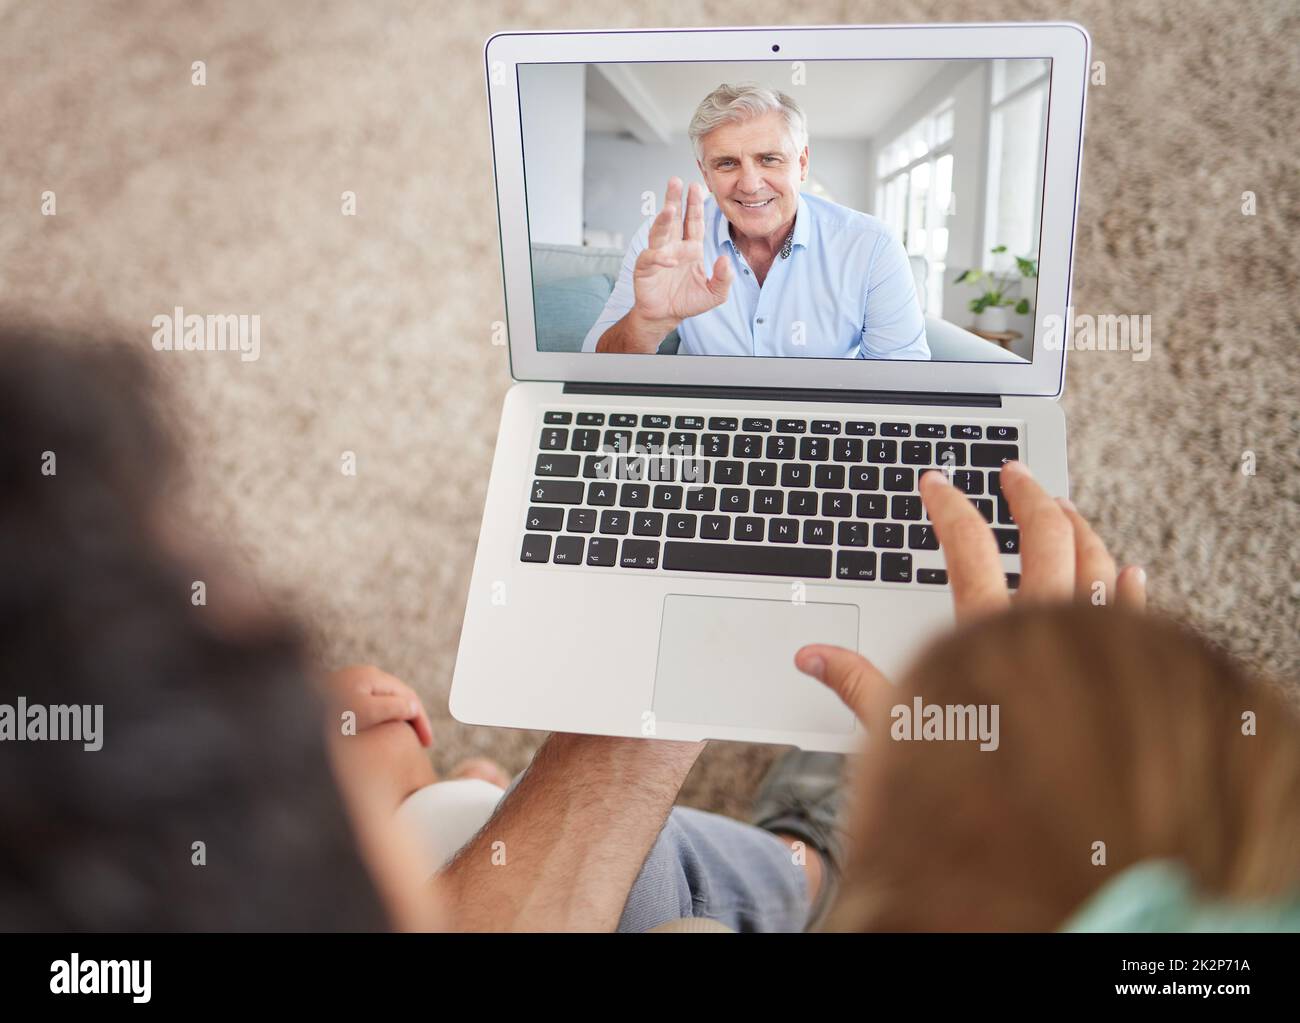 Love, family and laptop video call with senior man waving hello on digital internet screen. Online app webcam communication with happy and smiling Stock Photo